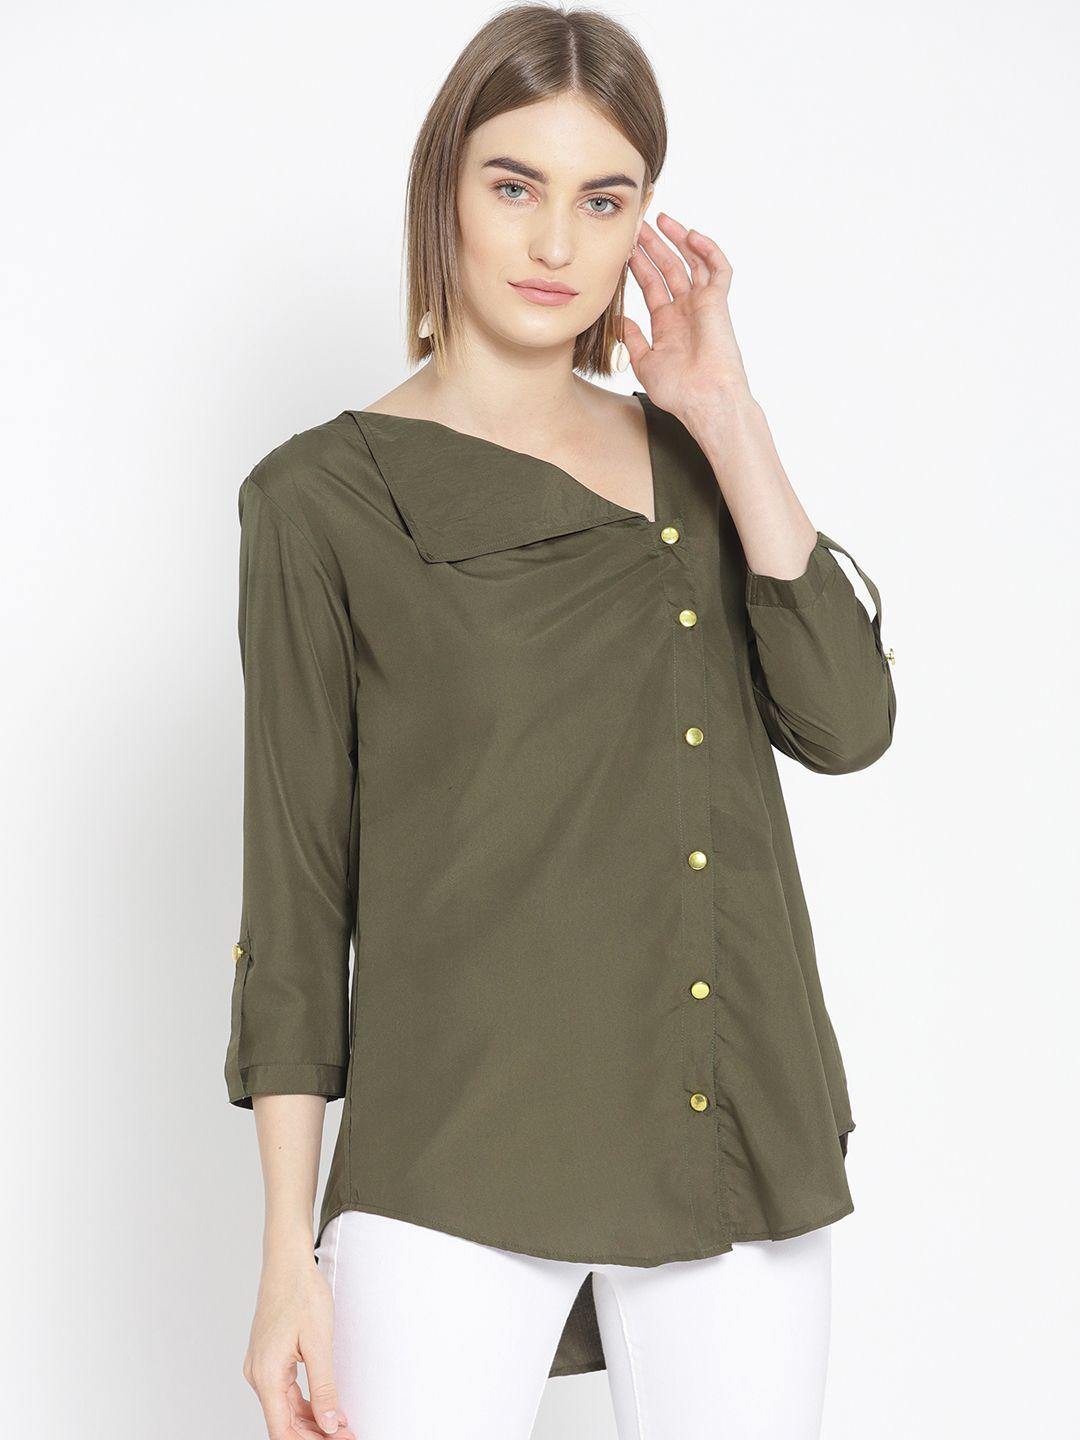 qurvii plus size women olive green solid high-low top